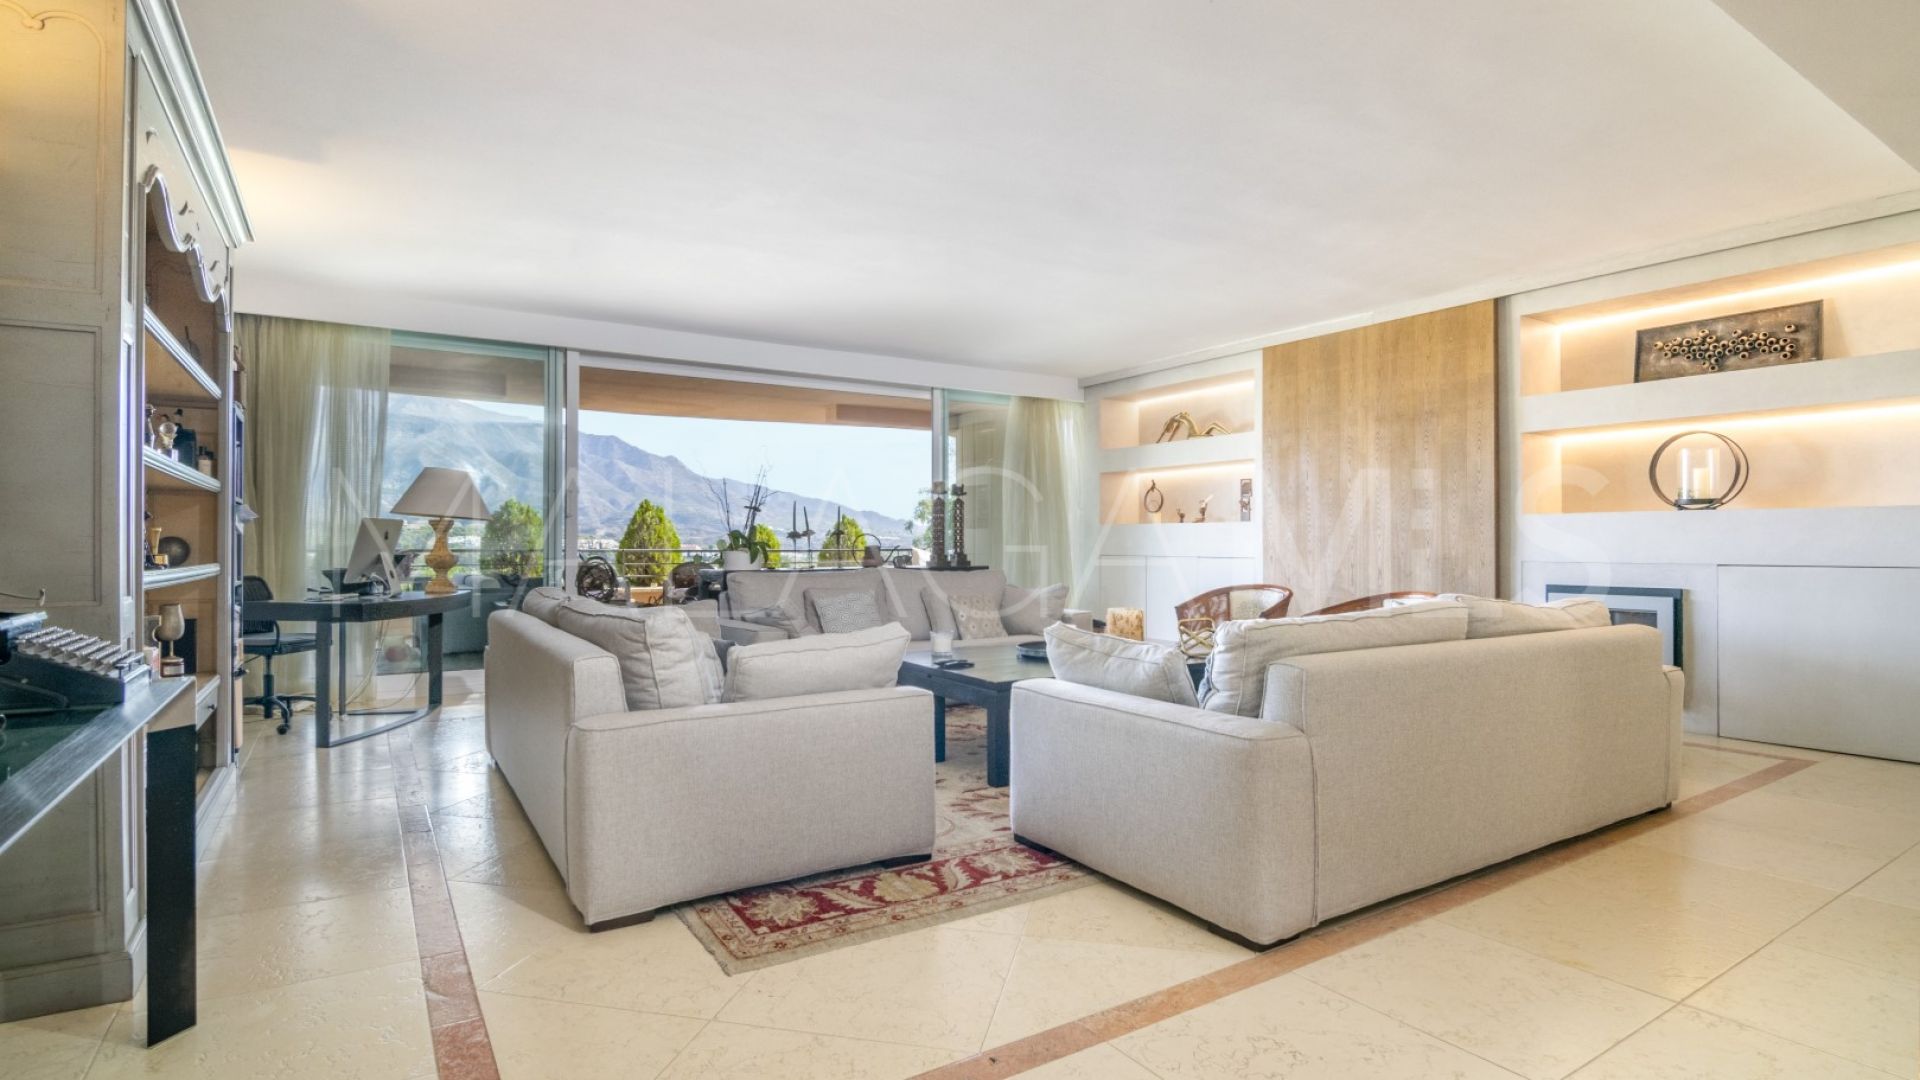 4 bedrooms apartment in Magna Marbella for sale